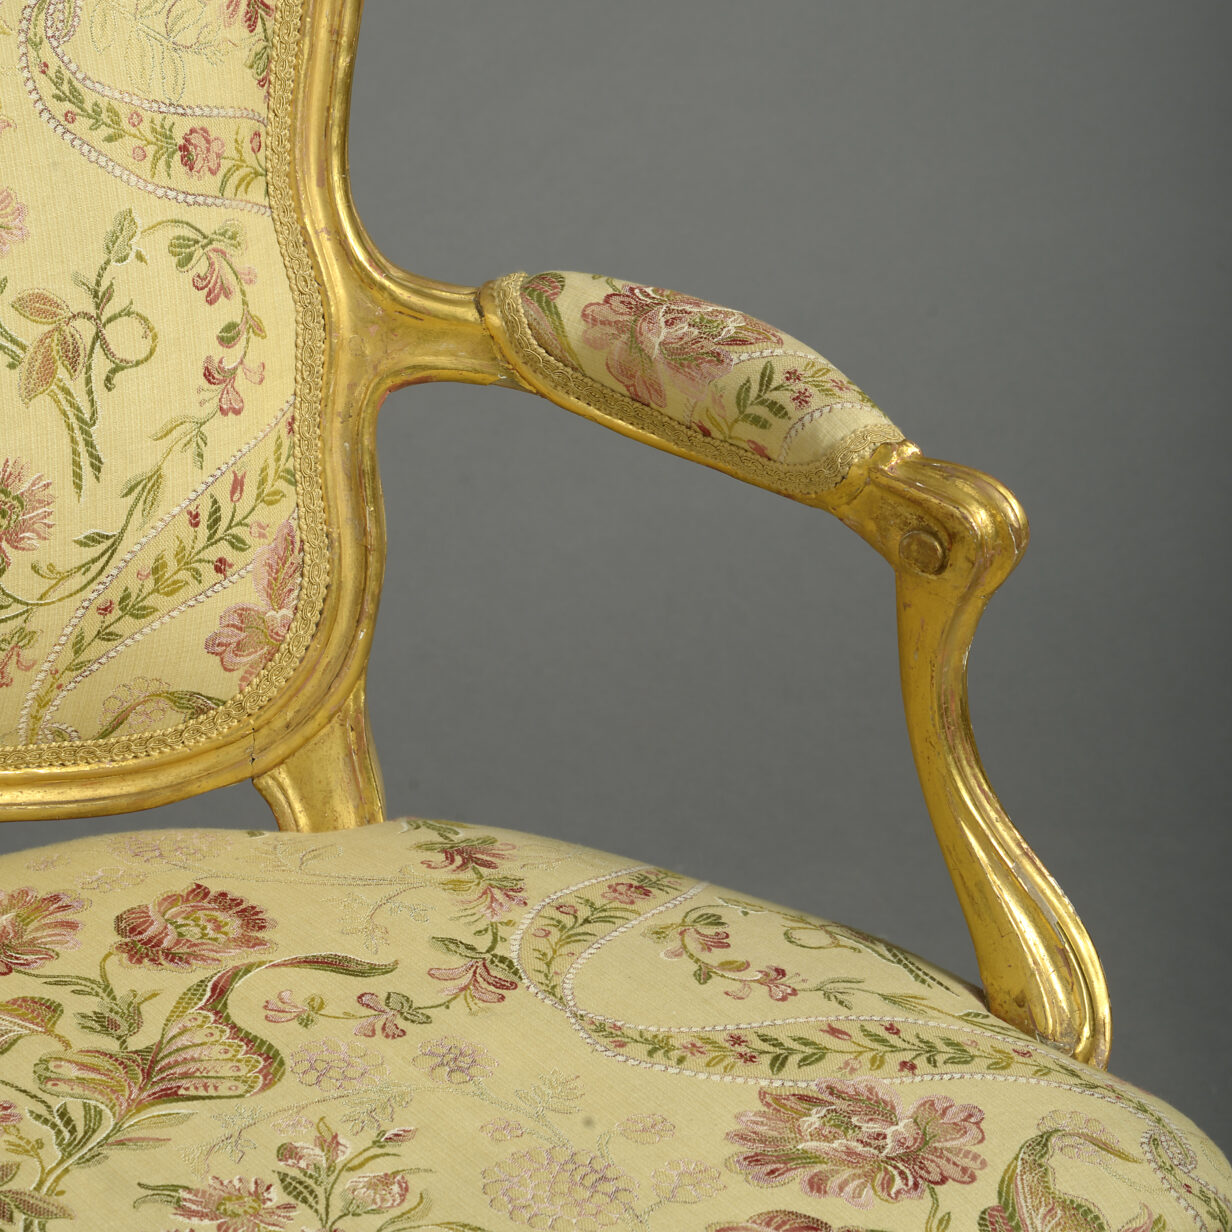 A close pair of louis xv giltwood rococo fauteuil armchairs